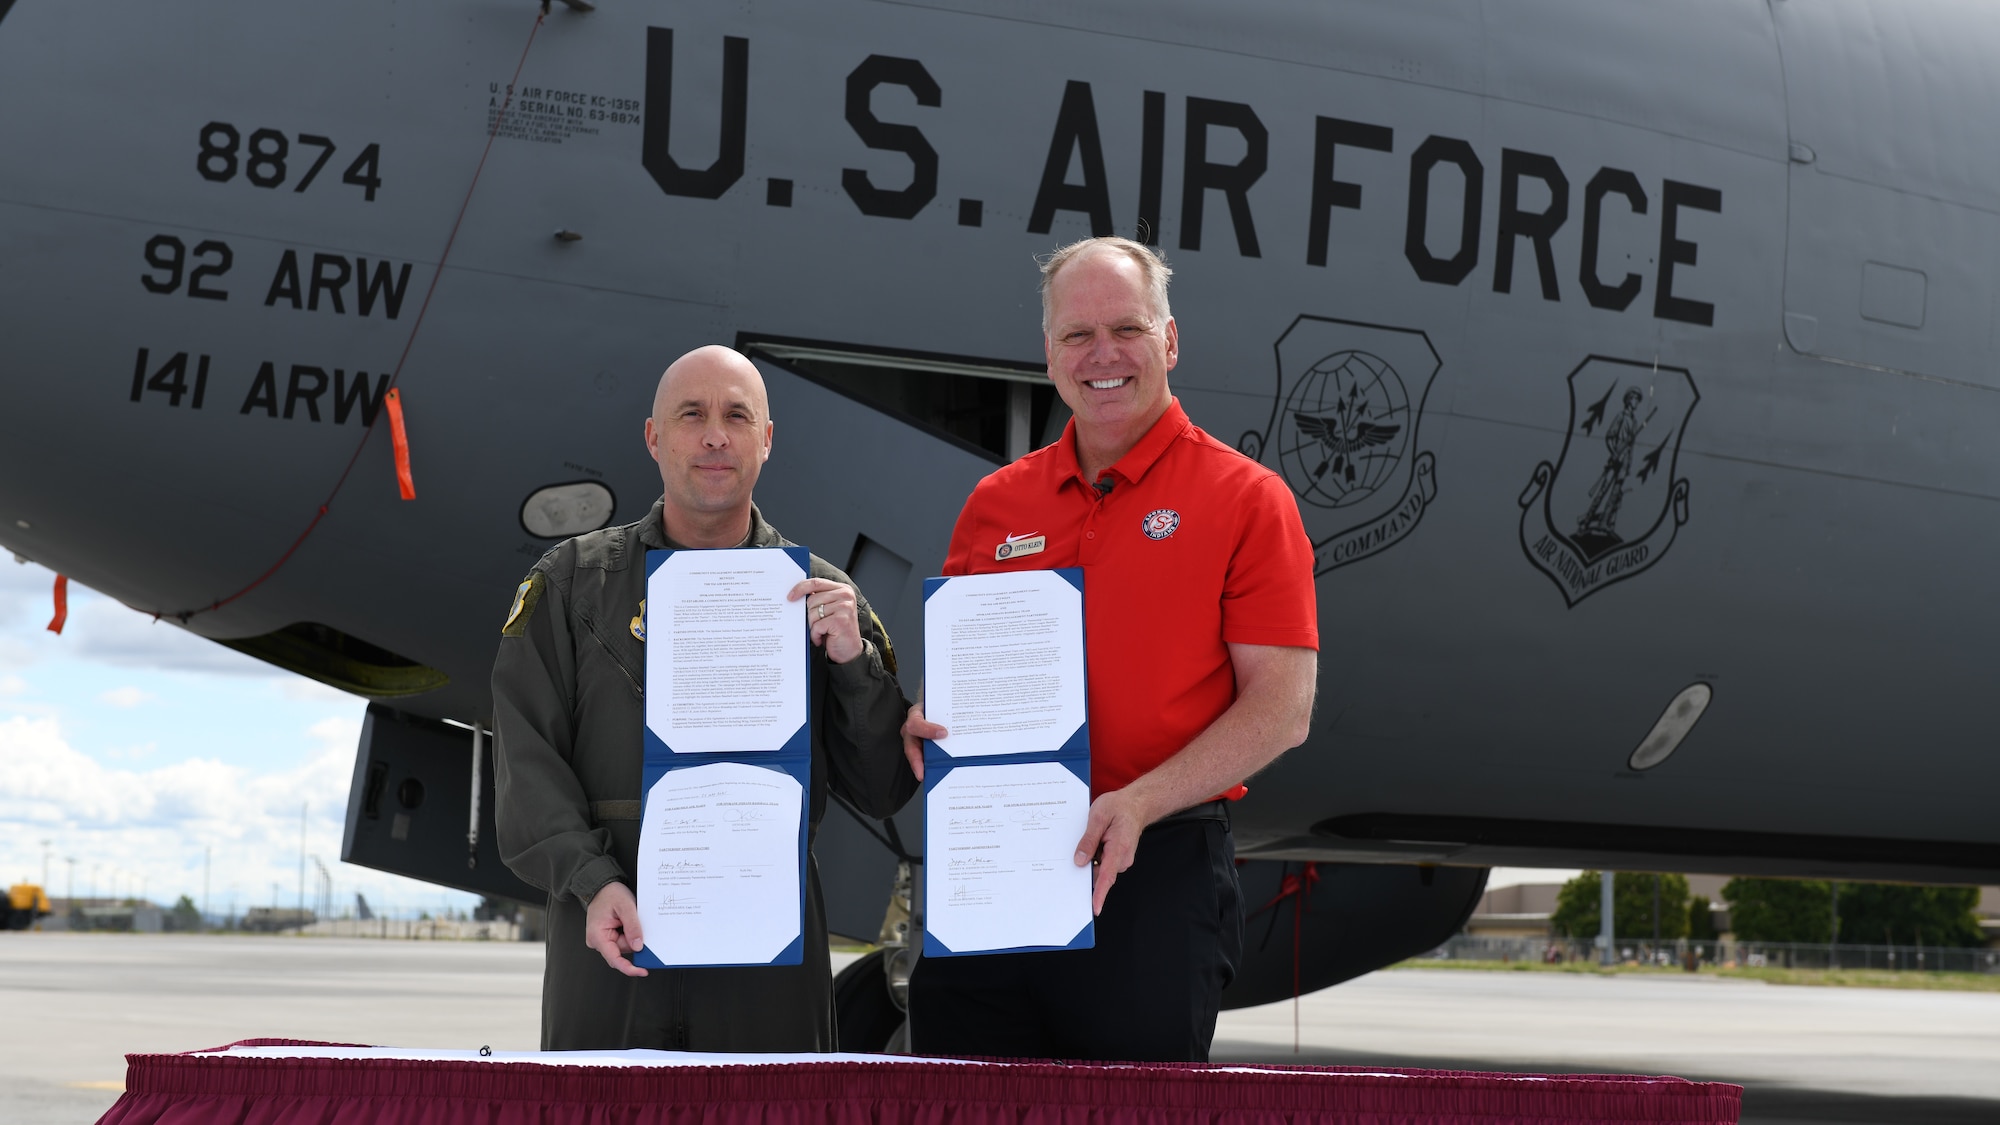 U.S. Air Force Col. Cassius Bentley, 92nd Air Refueling Wing commander, and Otto Klein, Spokane Indians Minor League Baseball team vice president, sign an agreement enacting Operation Fly Together at Fairchild Air Force Base, Washington, May 25, 2021. Fairchild Air Force Base's partnership with the Indians became known as Operation Fly Together and celebrates the KC-135 Stratotanker and the Airmen serving on the base, as well as the thousands of veterans from all branches of the Armed Forces who reside in the Spokane community. (U.S. Air Force photo by Senior Airman Breanne White)